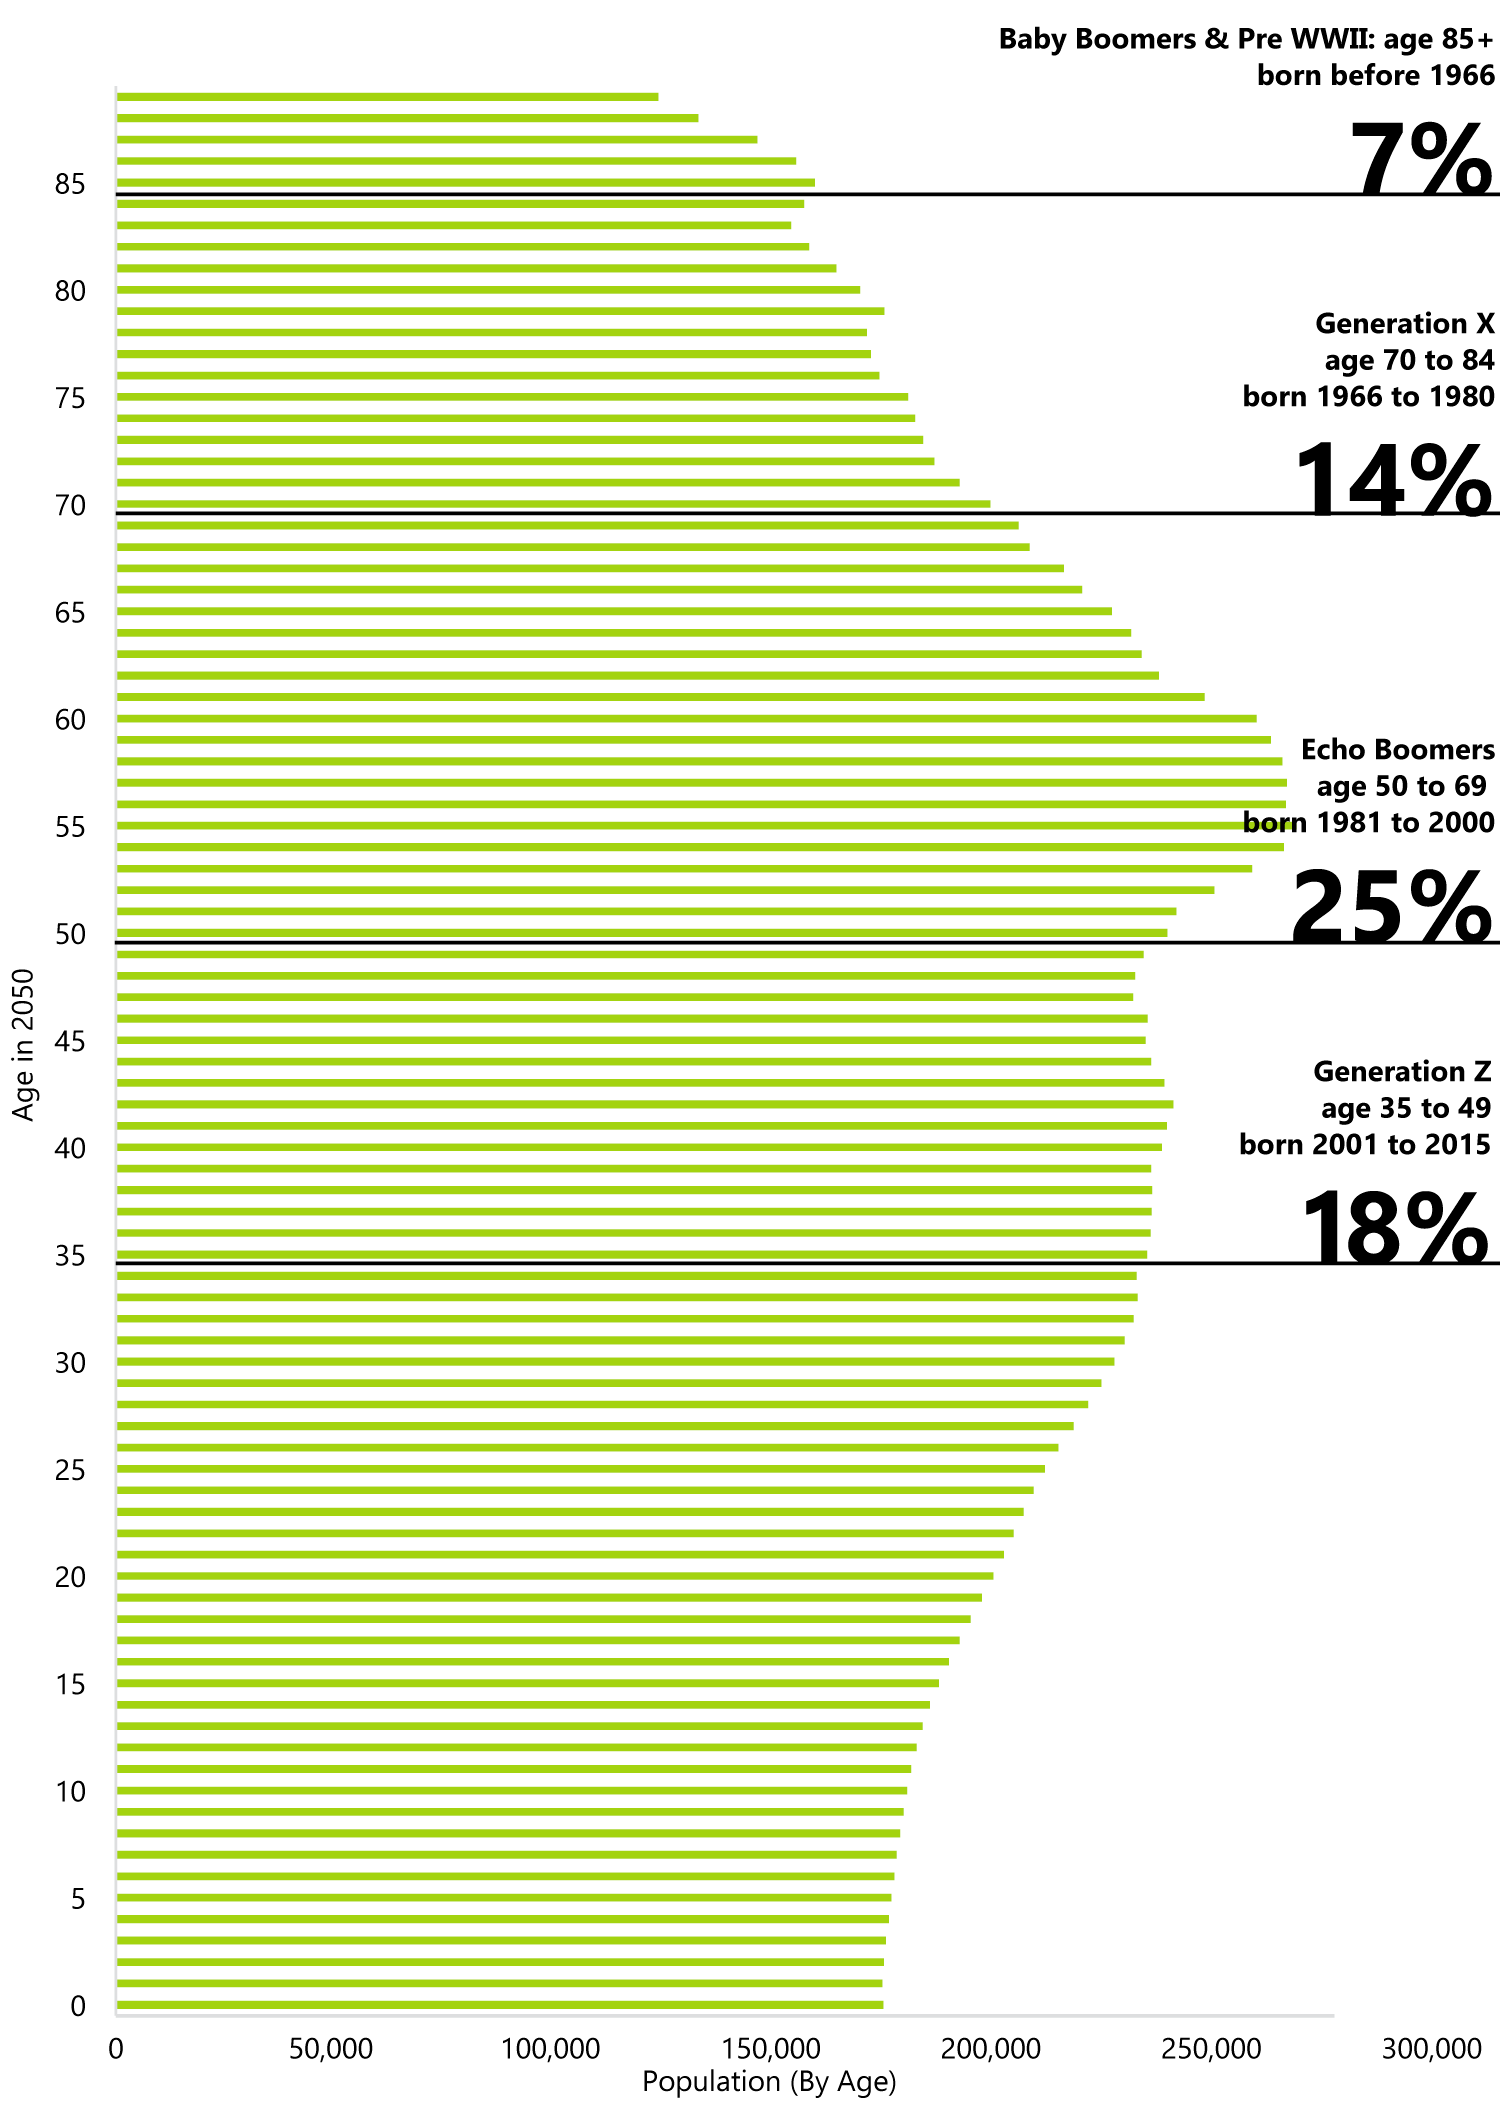 Ontario’s Age Distribution in 2050